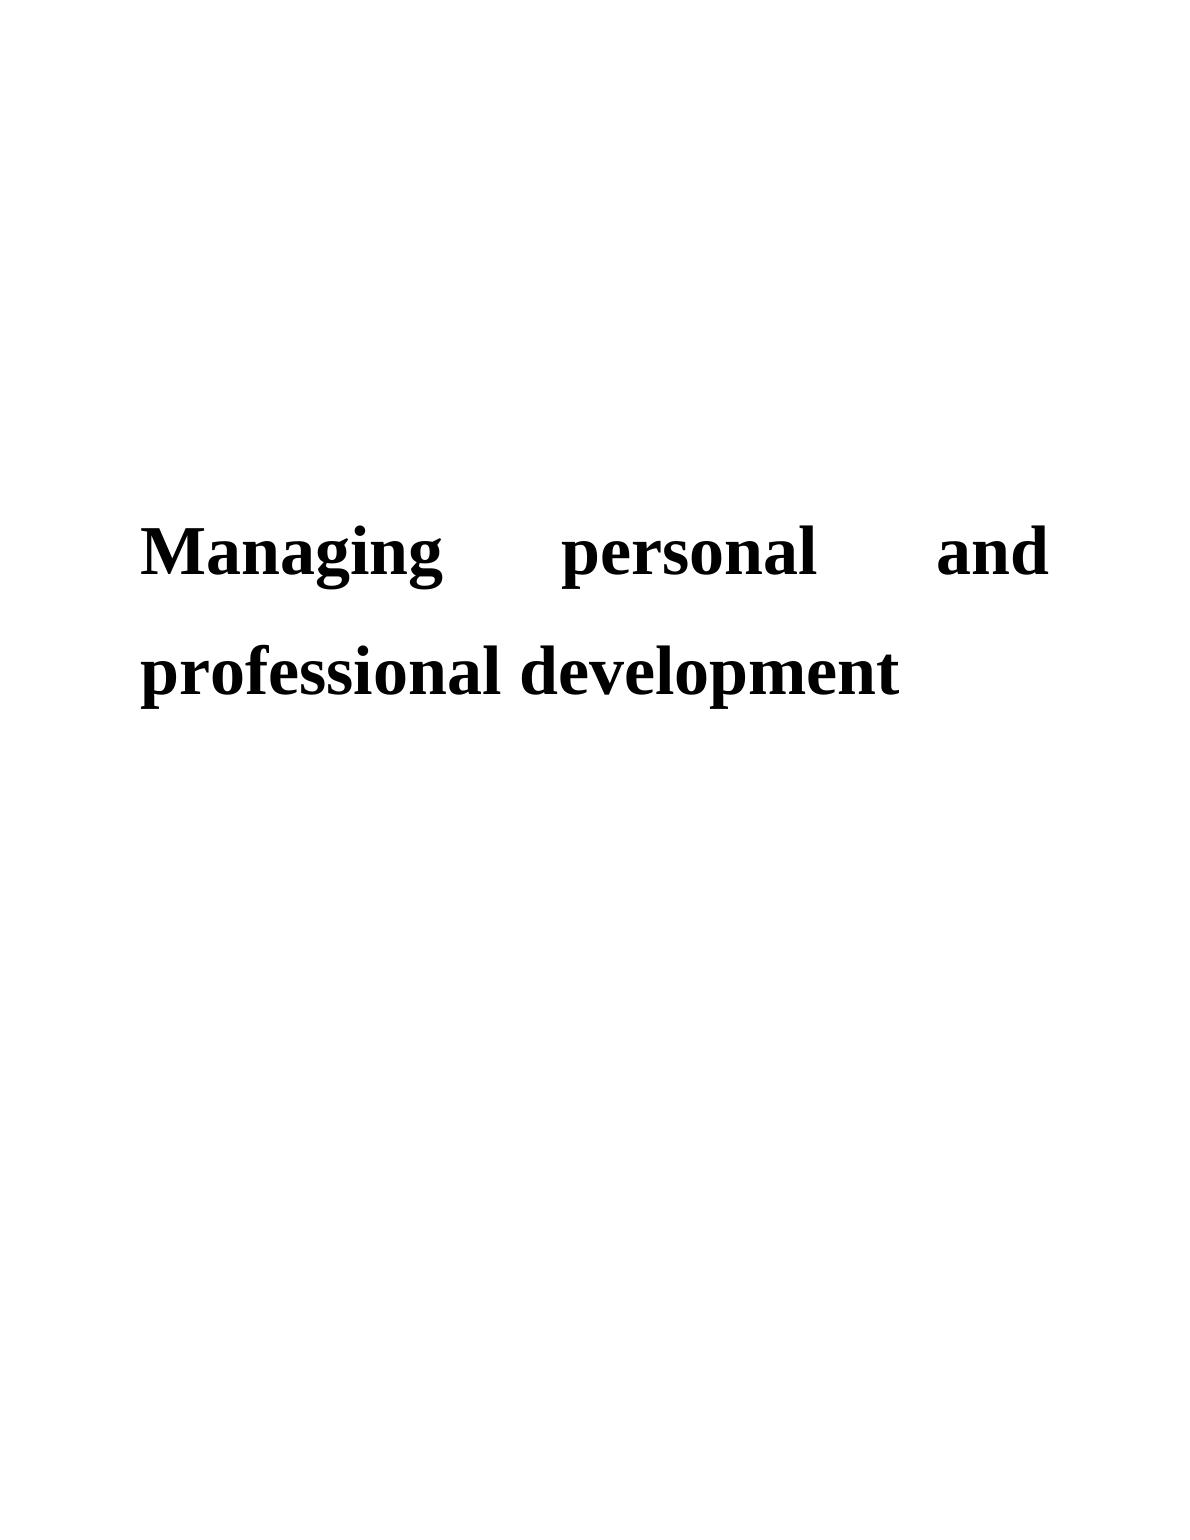 Managing Personal and Professional Development_1